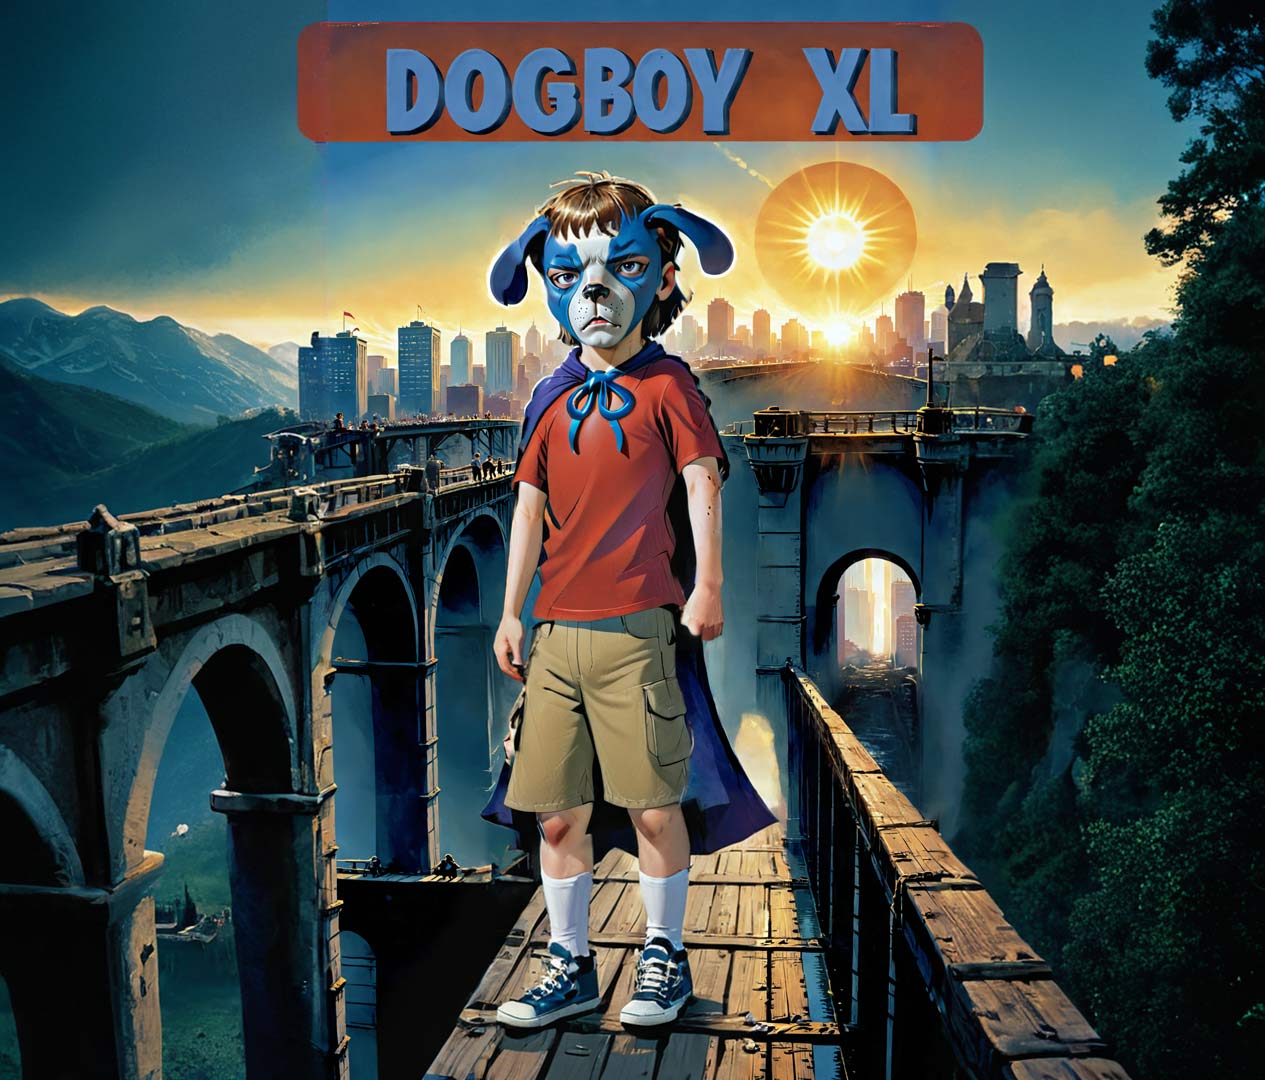 Dogboy, also known as Bronson Black, is Colta City’s 13-year-old guardian in the shadows. He's also the lead character of the hit cartoon show Dogboy Adventures, featured in the Everly Heights story Fanboy.